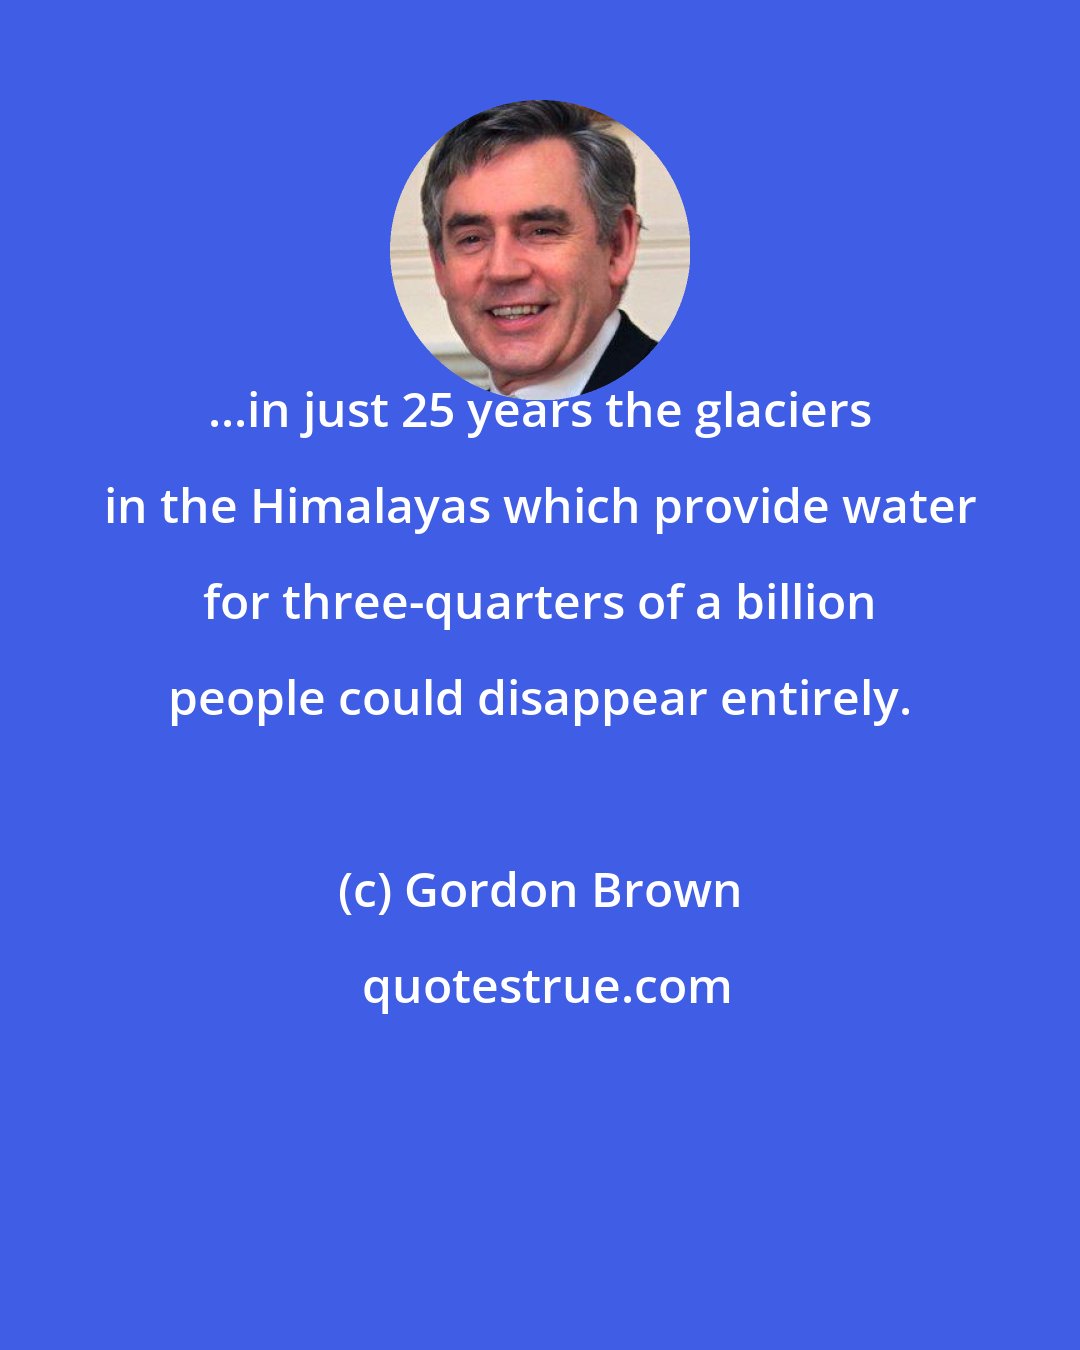 Gordon Brown: ...in just 25 years the glaciers in the Himalayas which provide water for three-quarters of a billion people could disappear entirely.